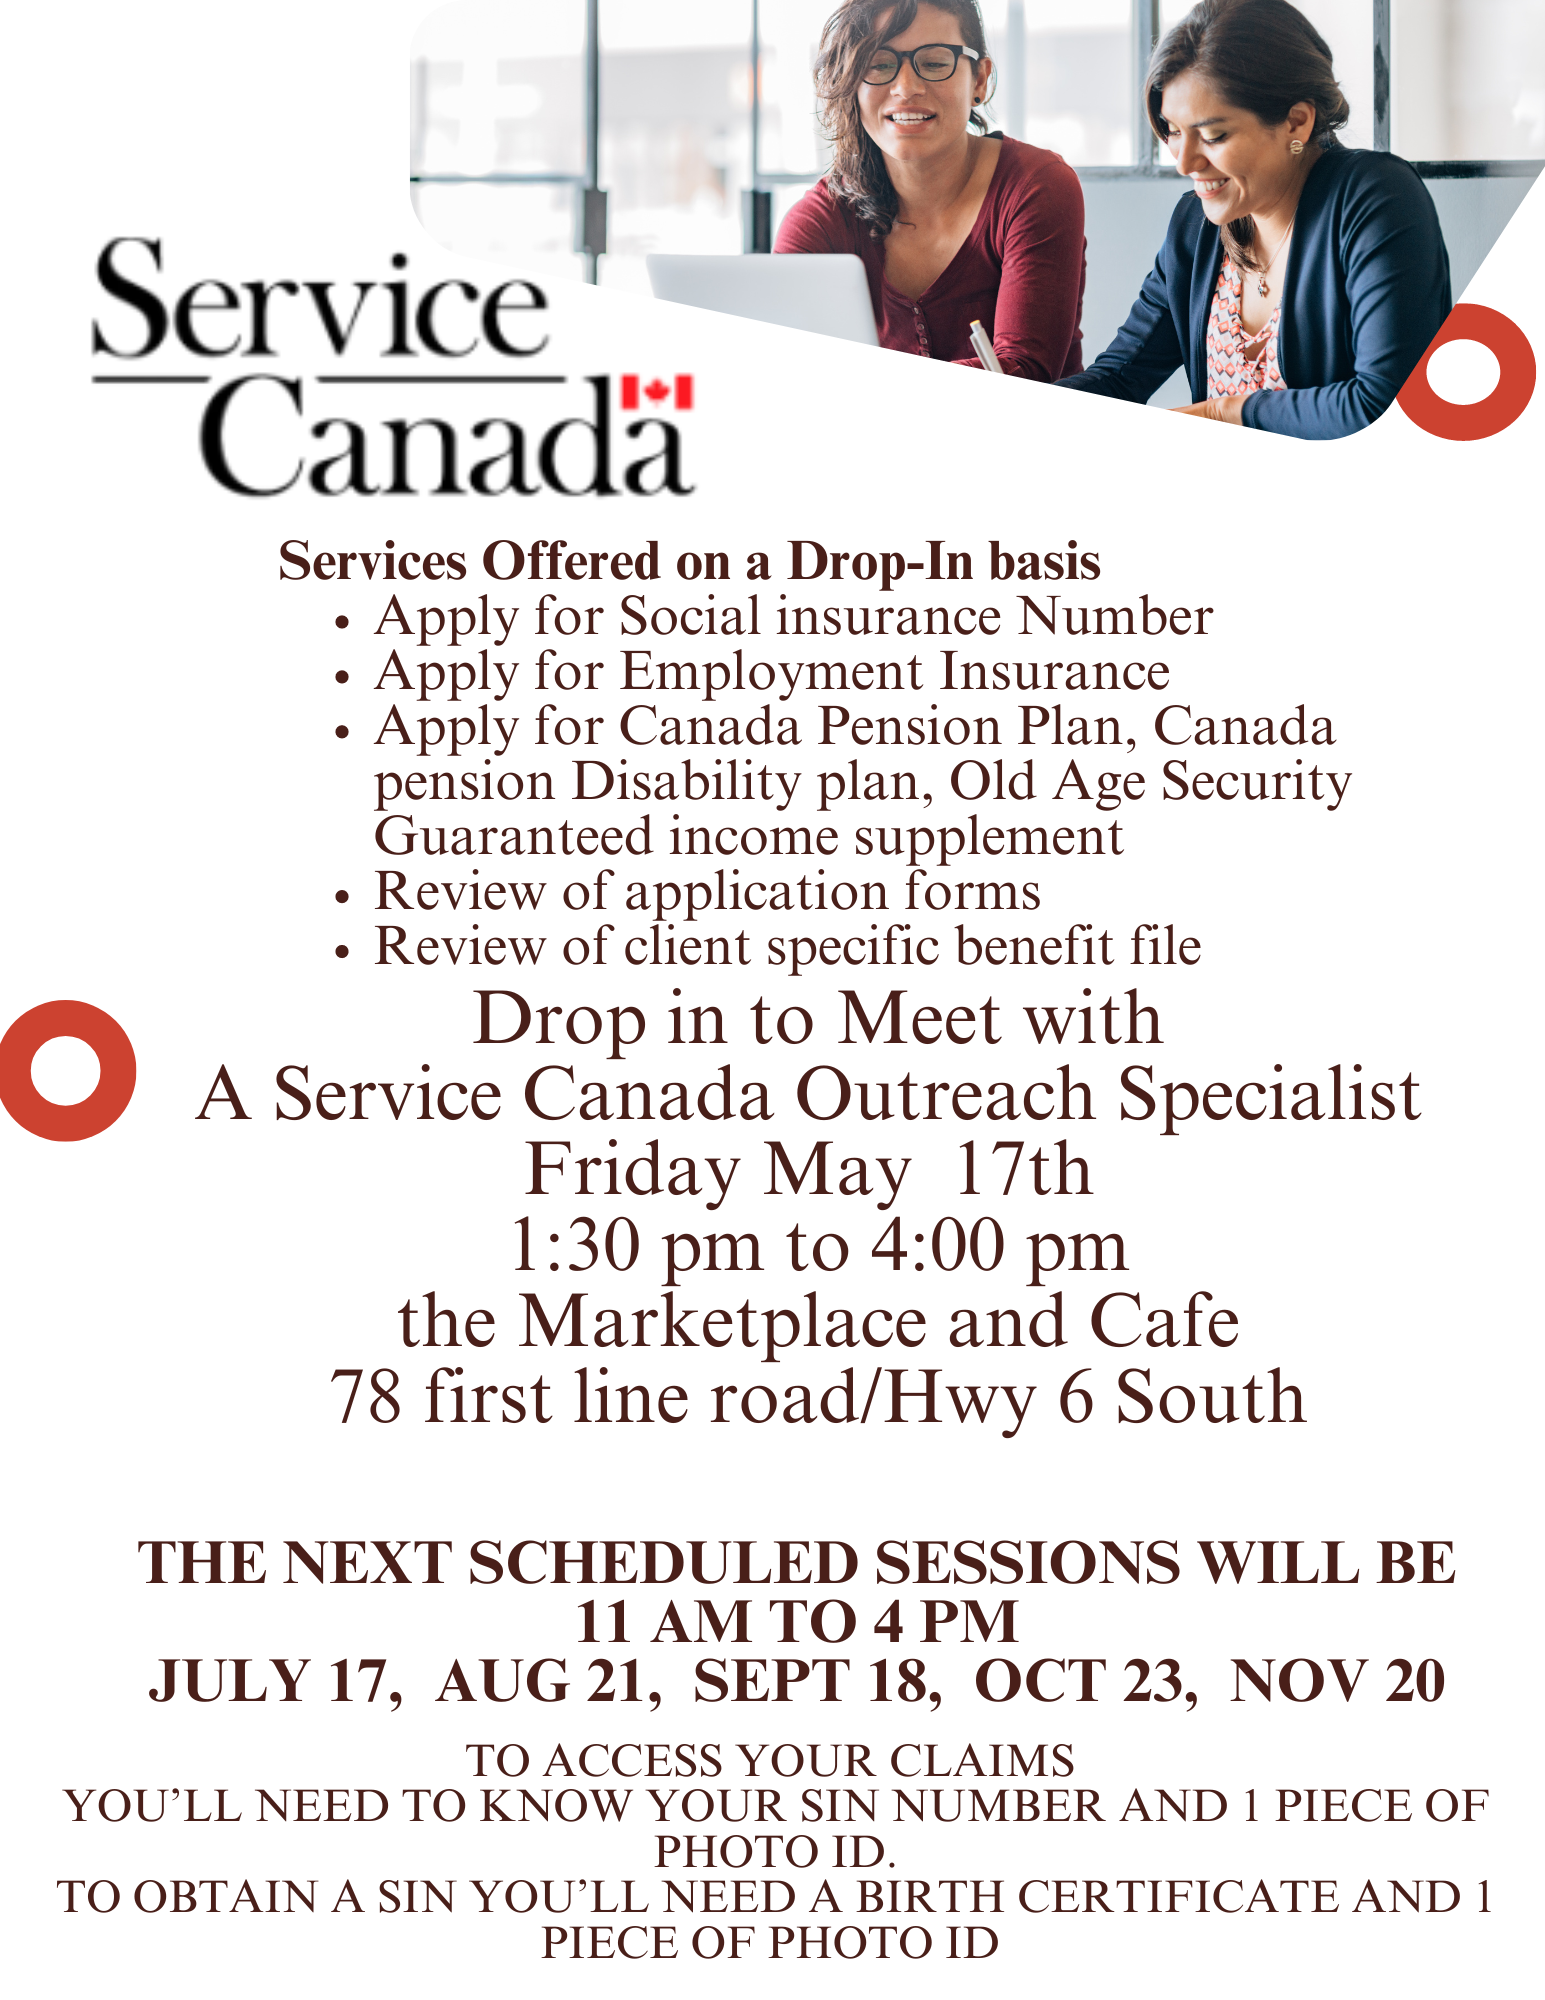 Service Canada at the Marketplace and Cafe on May 17